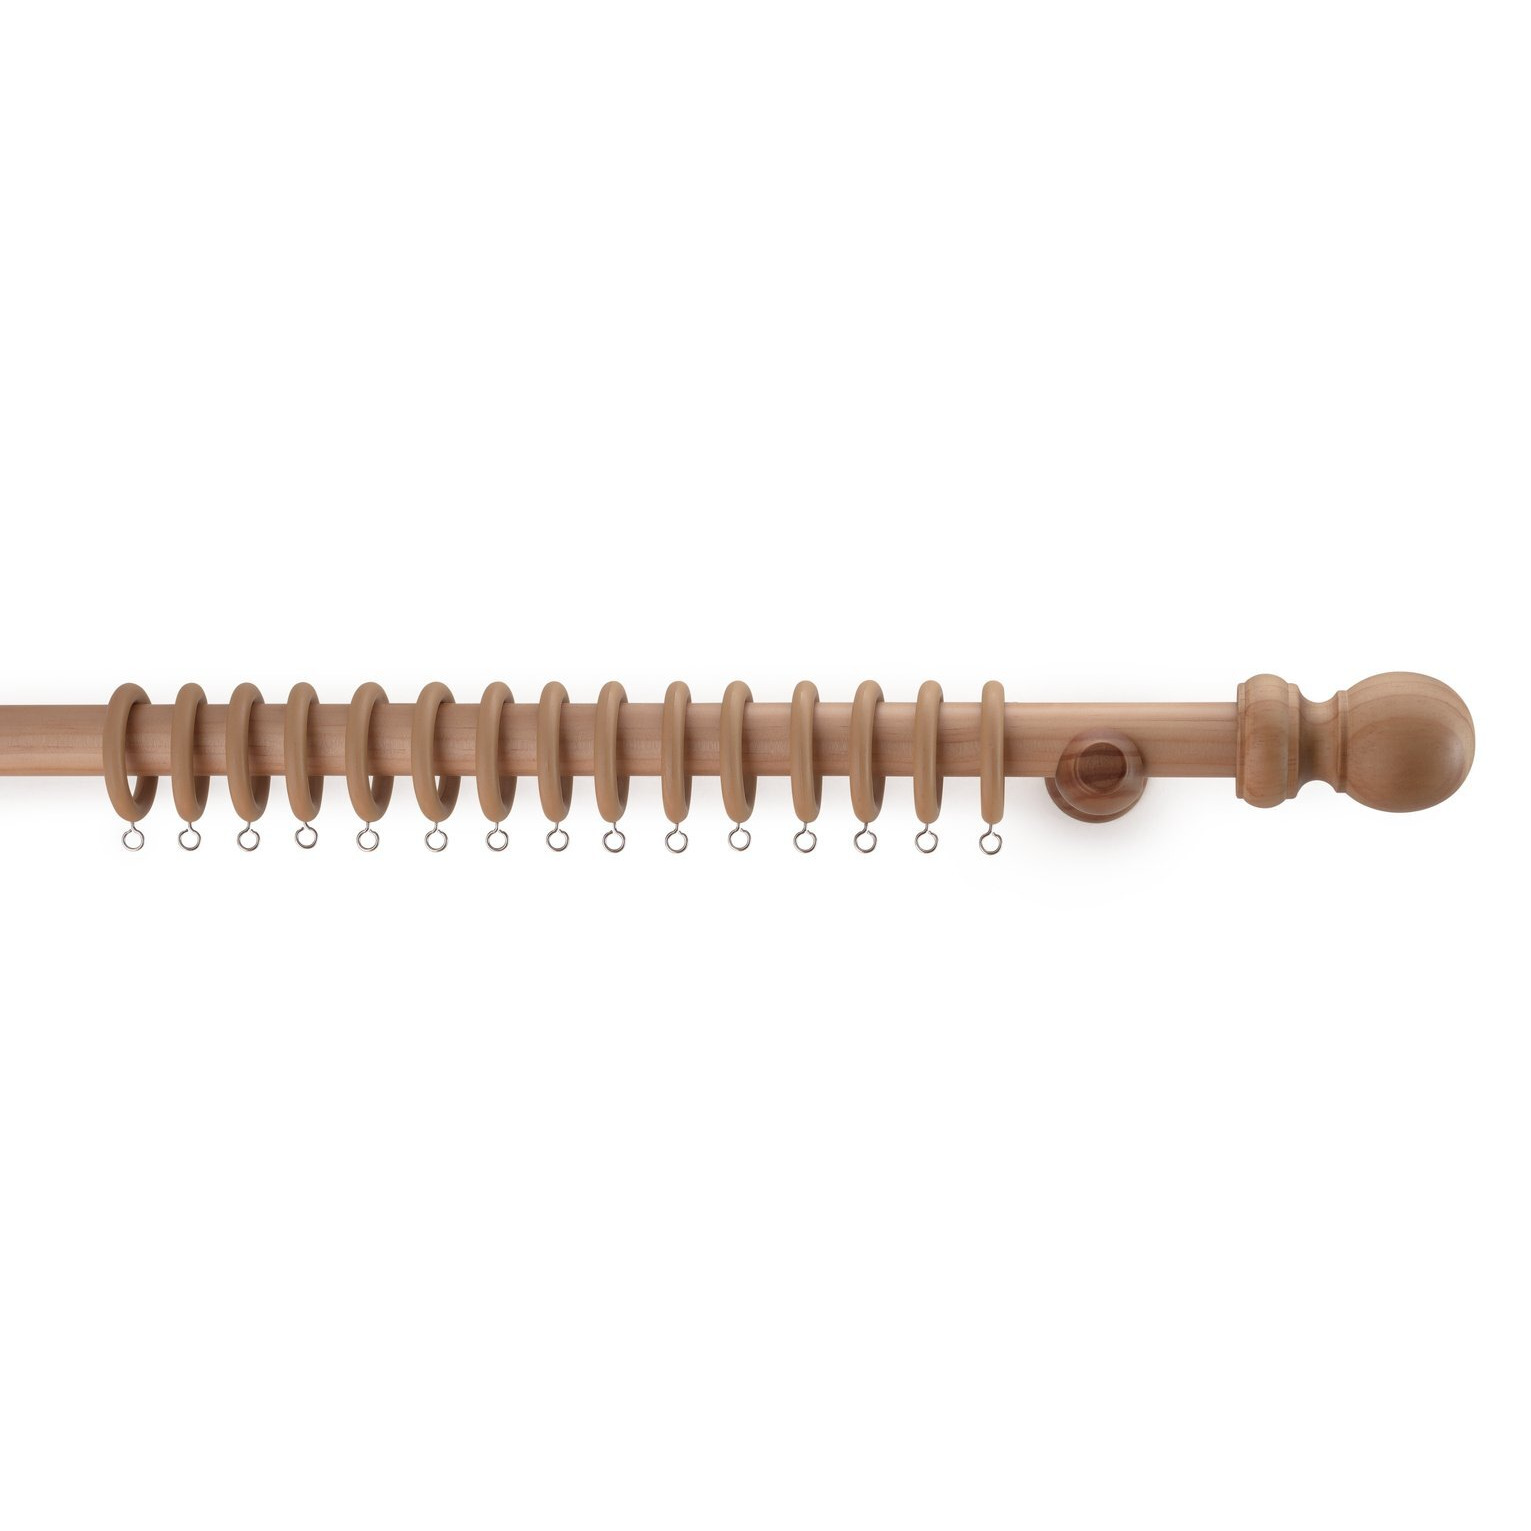 Argos Home 1.8m Wooden Curtain Pole - Natural - image 1